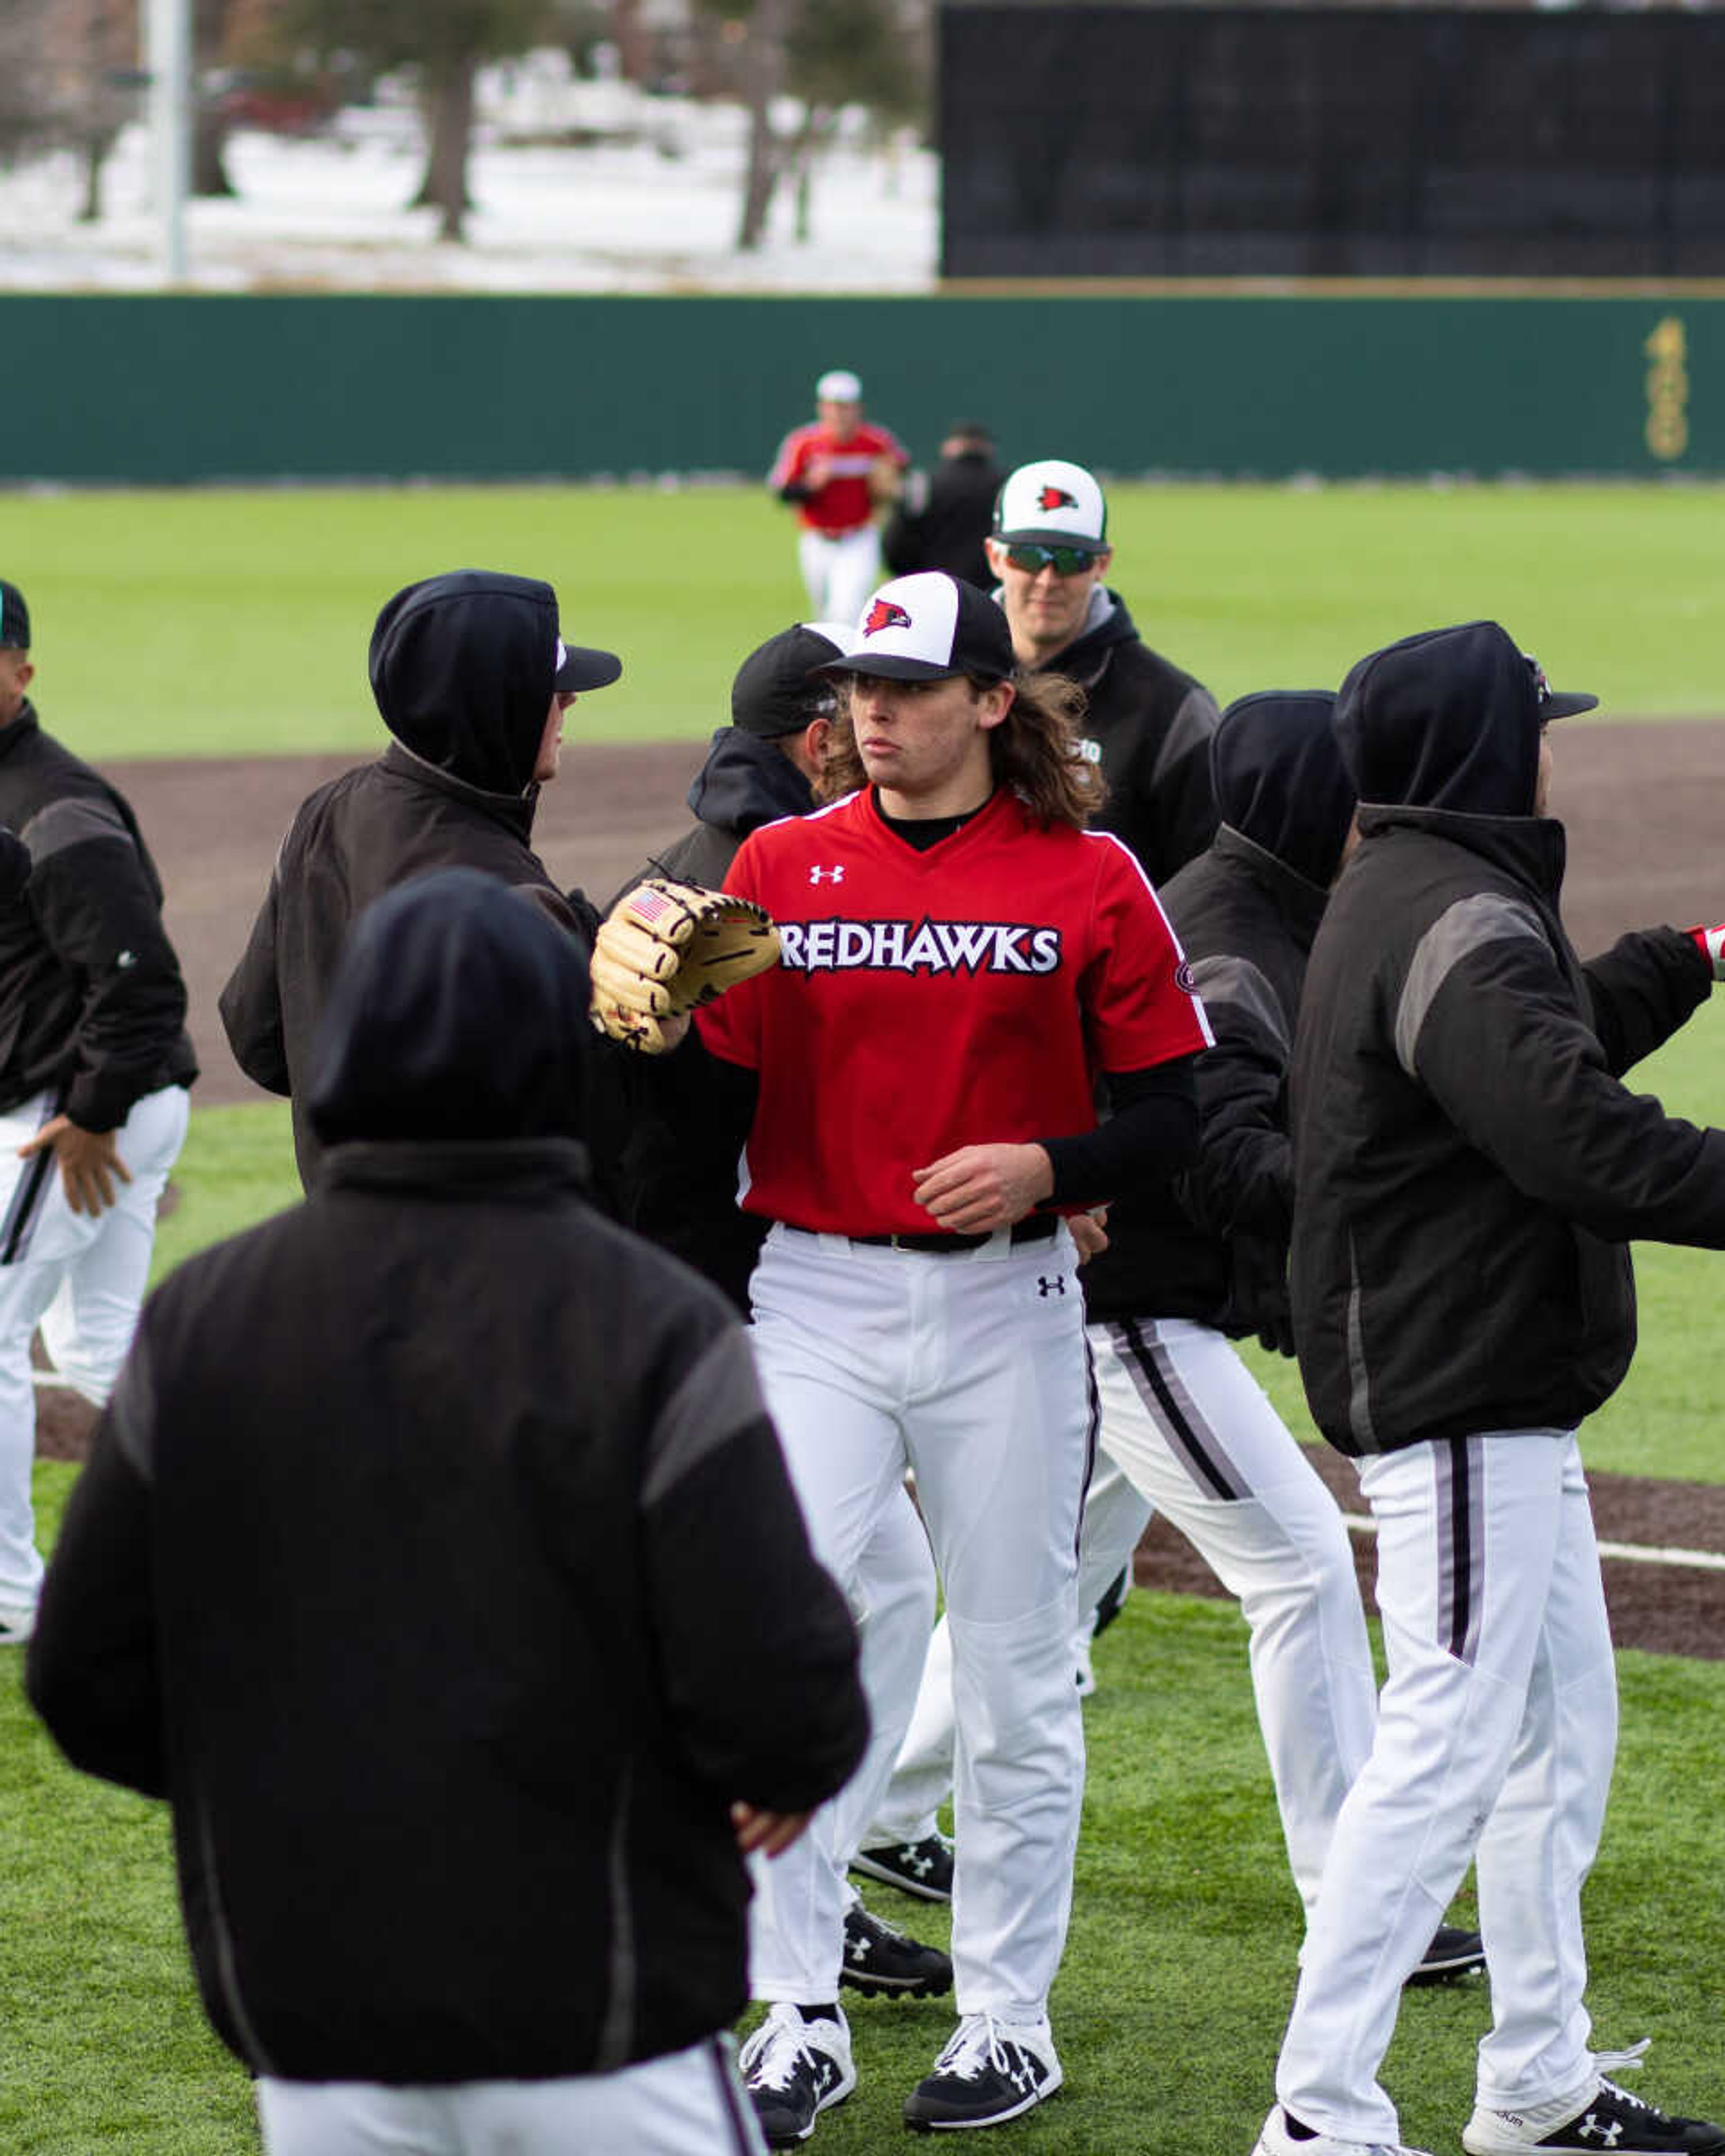 Redhawks hold Harris-Stowe to 4 hits in shut out